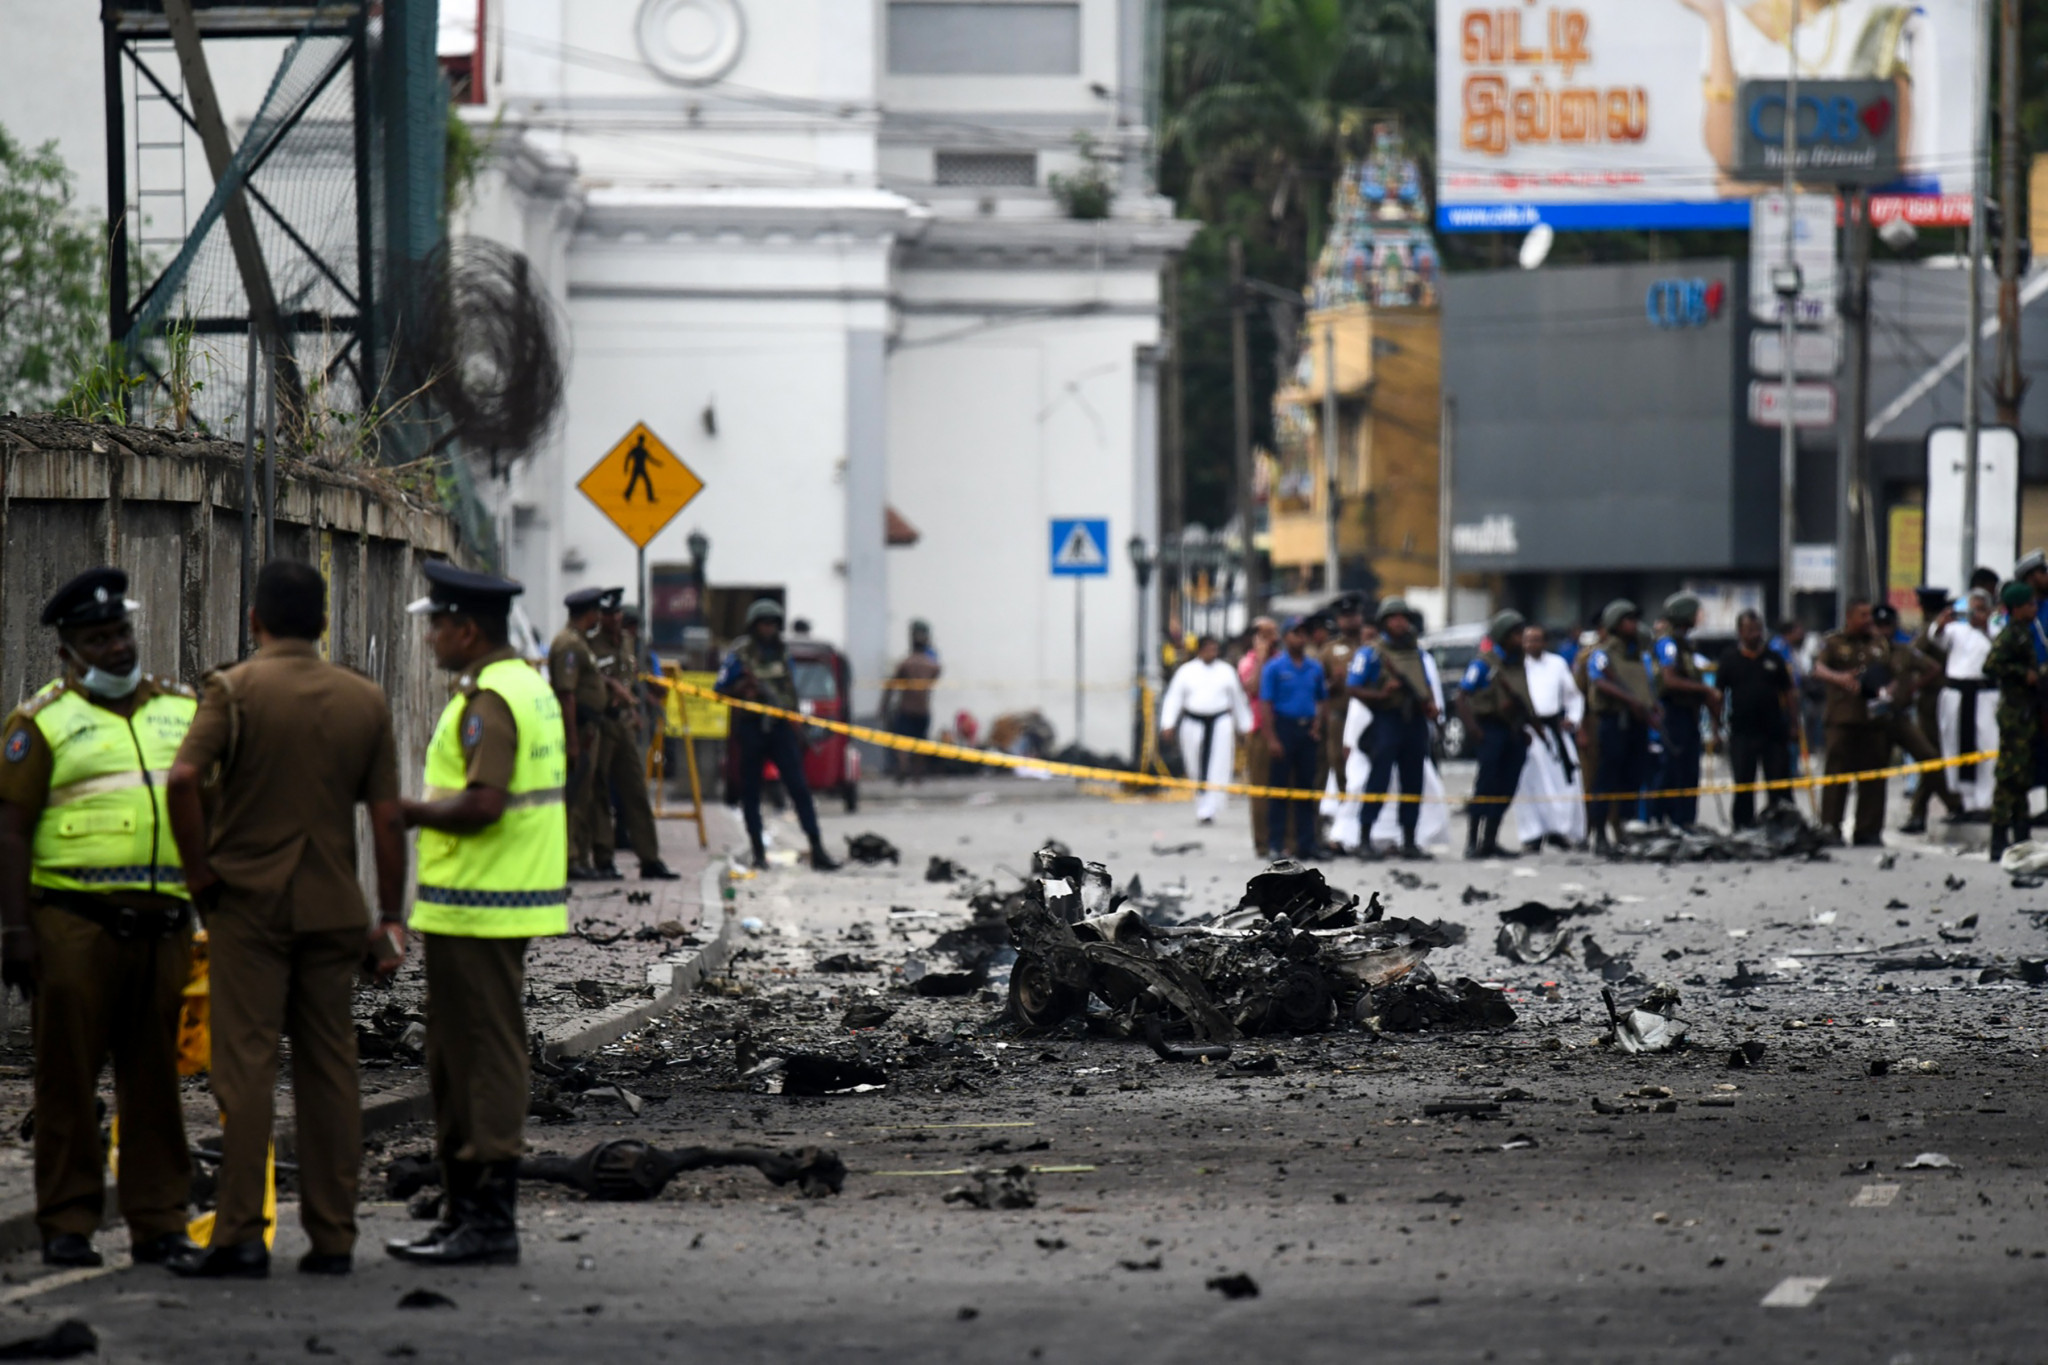 Olympic Council of Asia President expresses shock and grief over Sri Lanka attacks